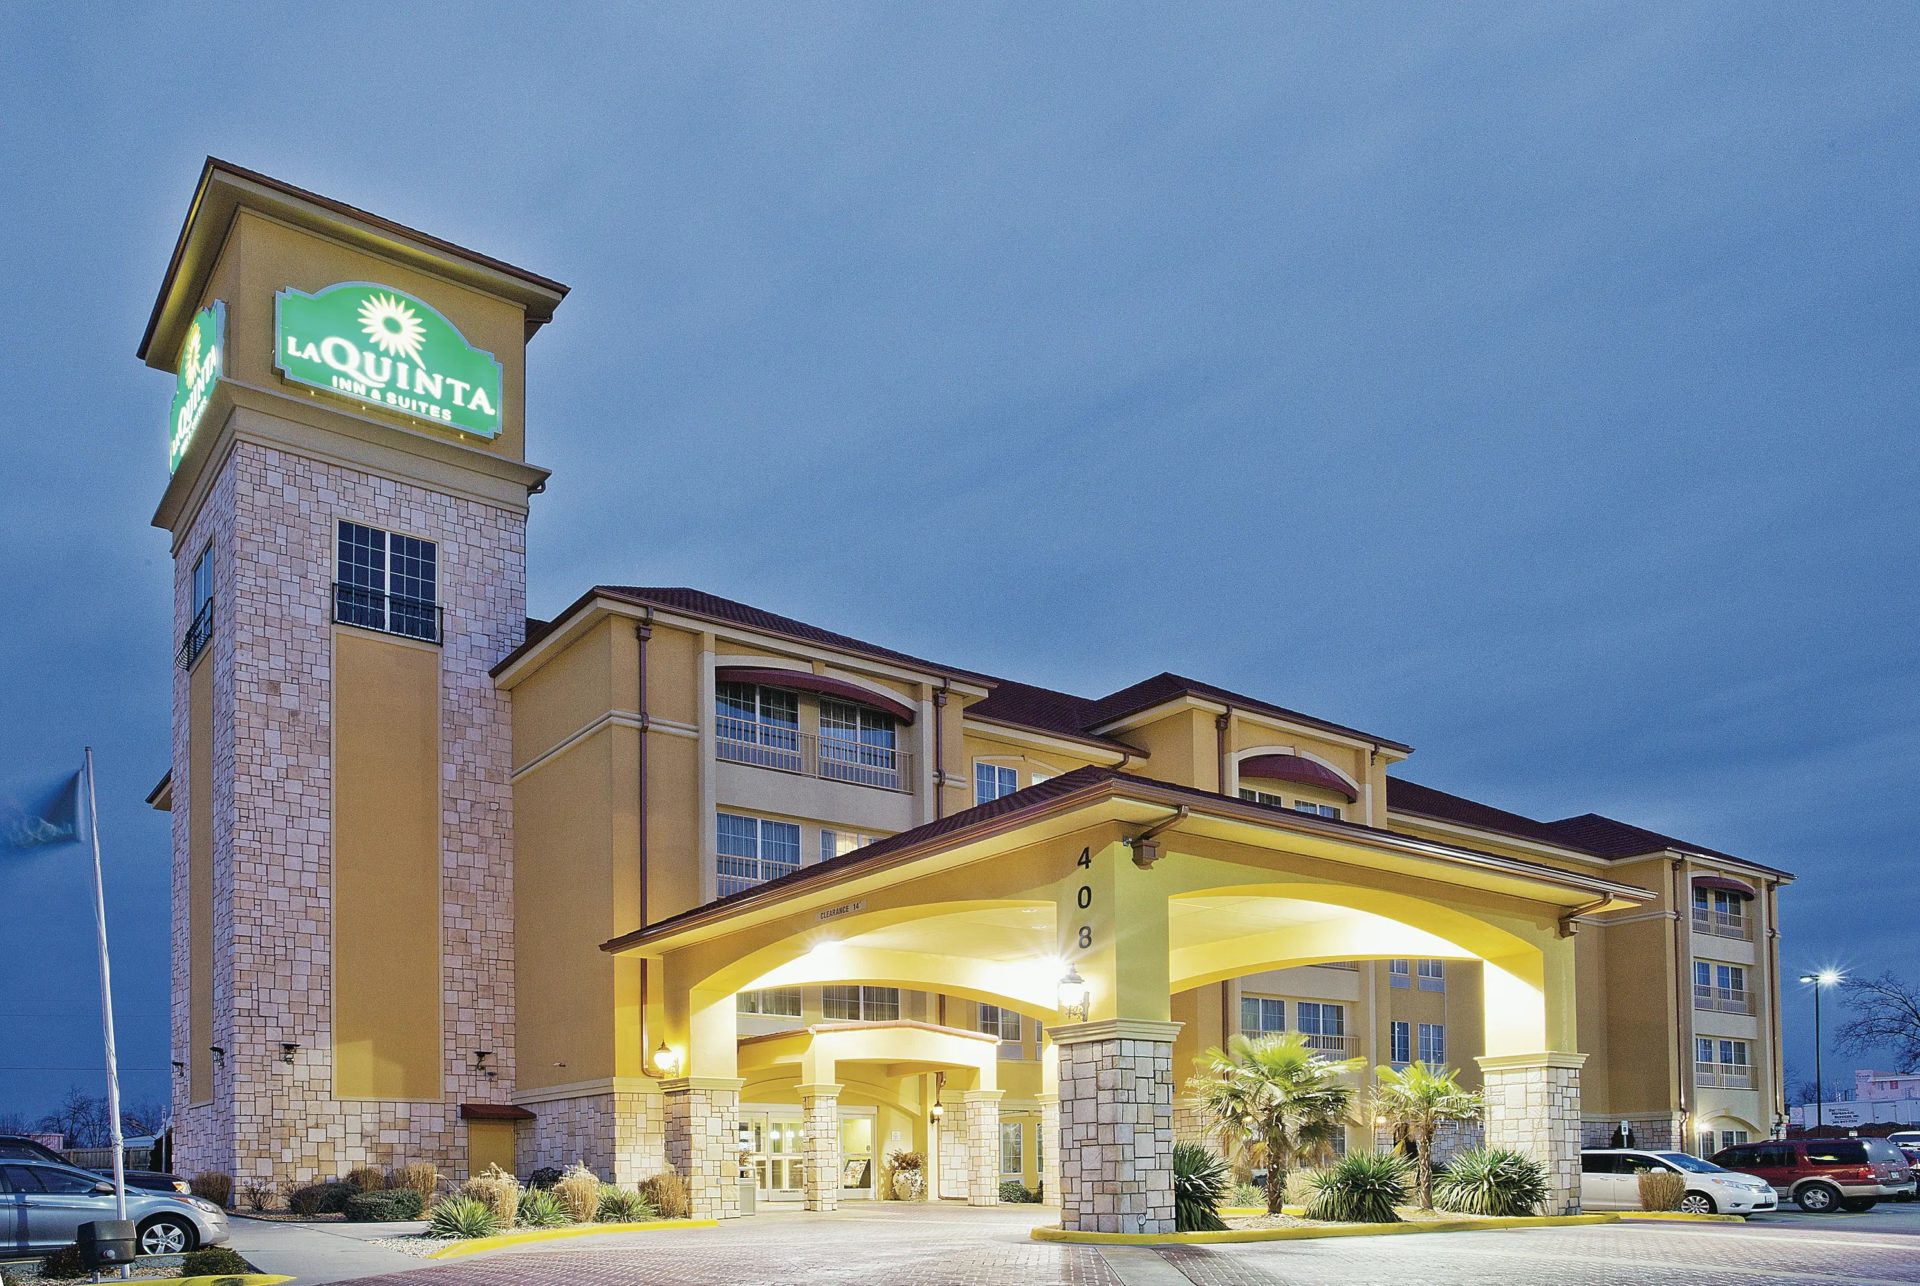 Quinta Inn and Suites Wyndham Little Rock Bryant gay and